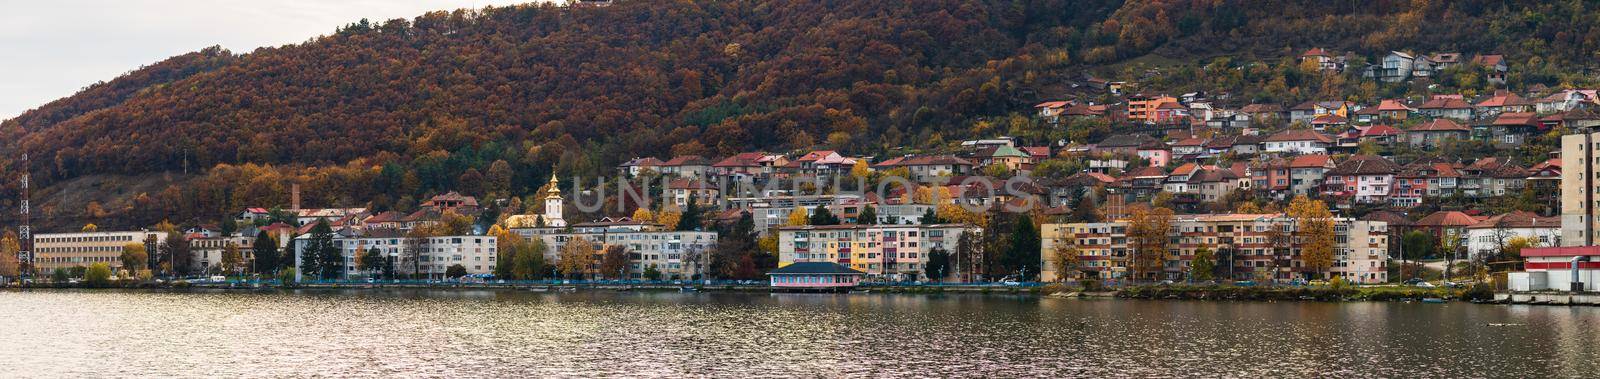 View of Danube river and Orsova city vegetation and buildings, waterfront view. Orsova, Romania, 2021 by vladispas